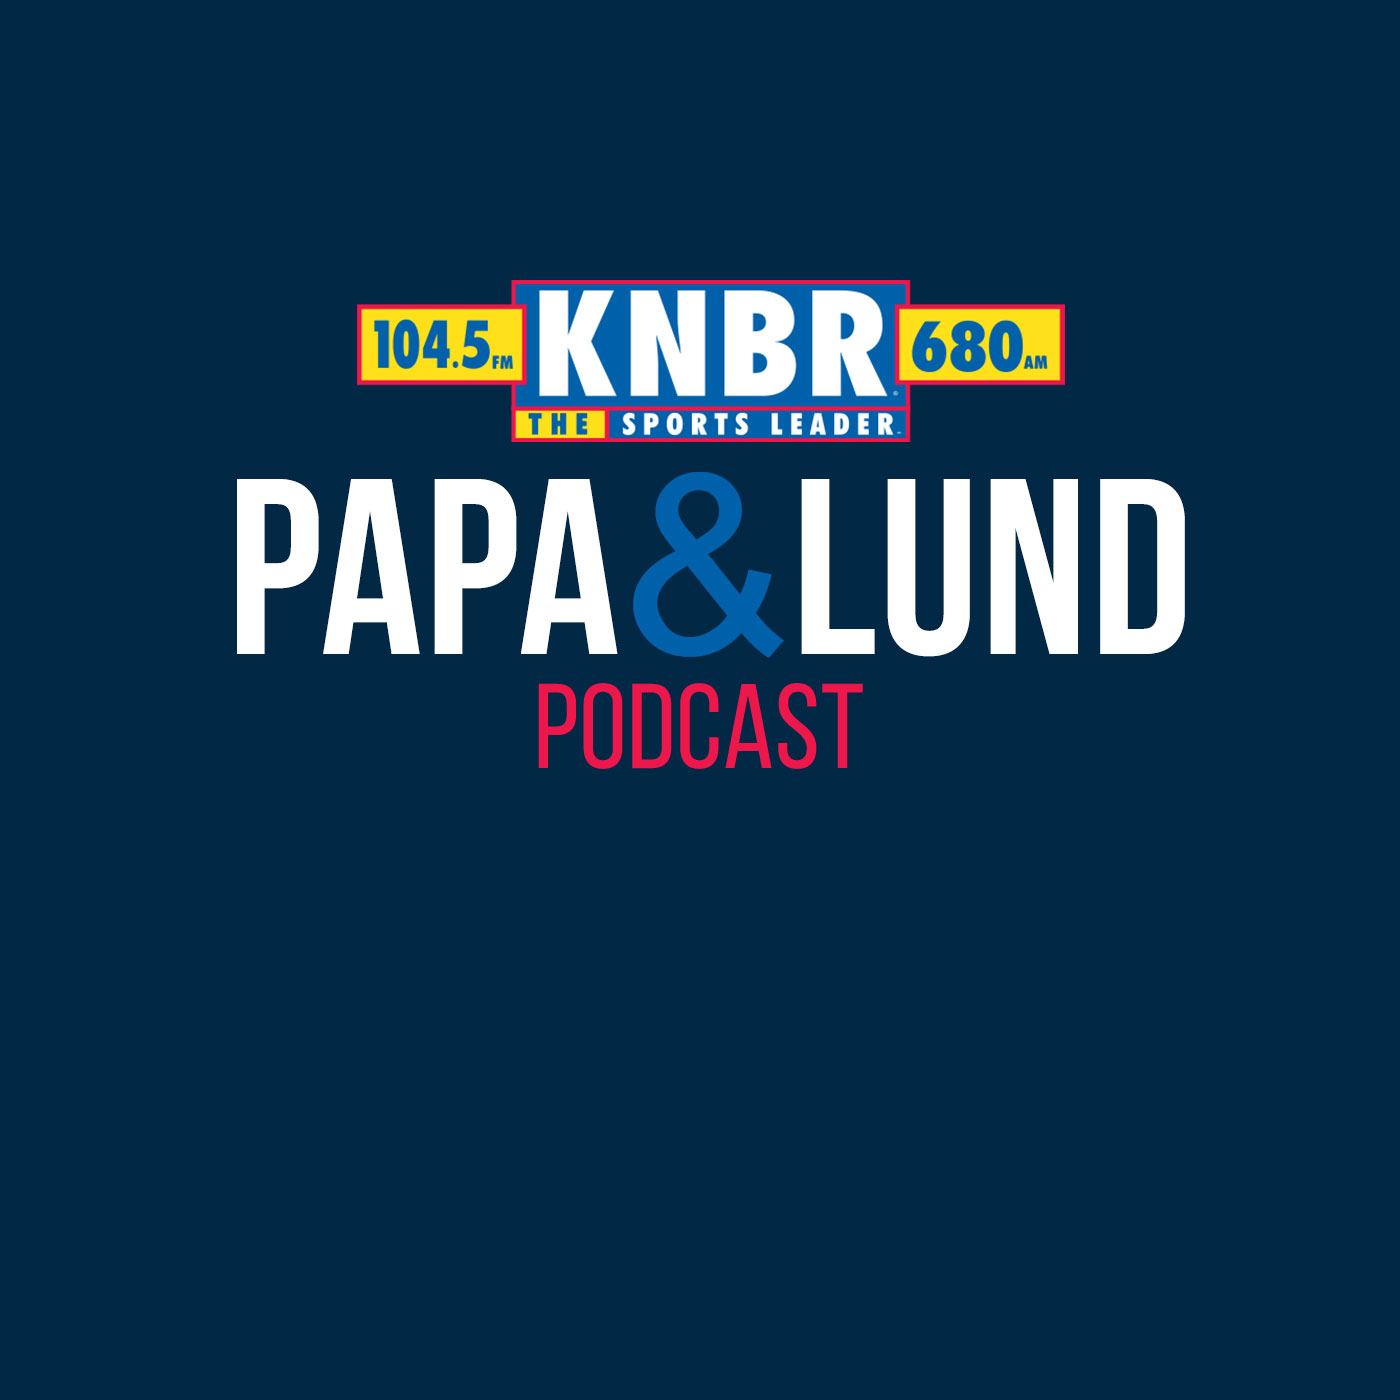 10-17 Connor Letourneau joins Papa & Lund to break down the financial state of the Warriors after Jordan Poole & Andrew Wiggins receive their contract extensions as well as what this means for Draymond Green's future with the team